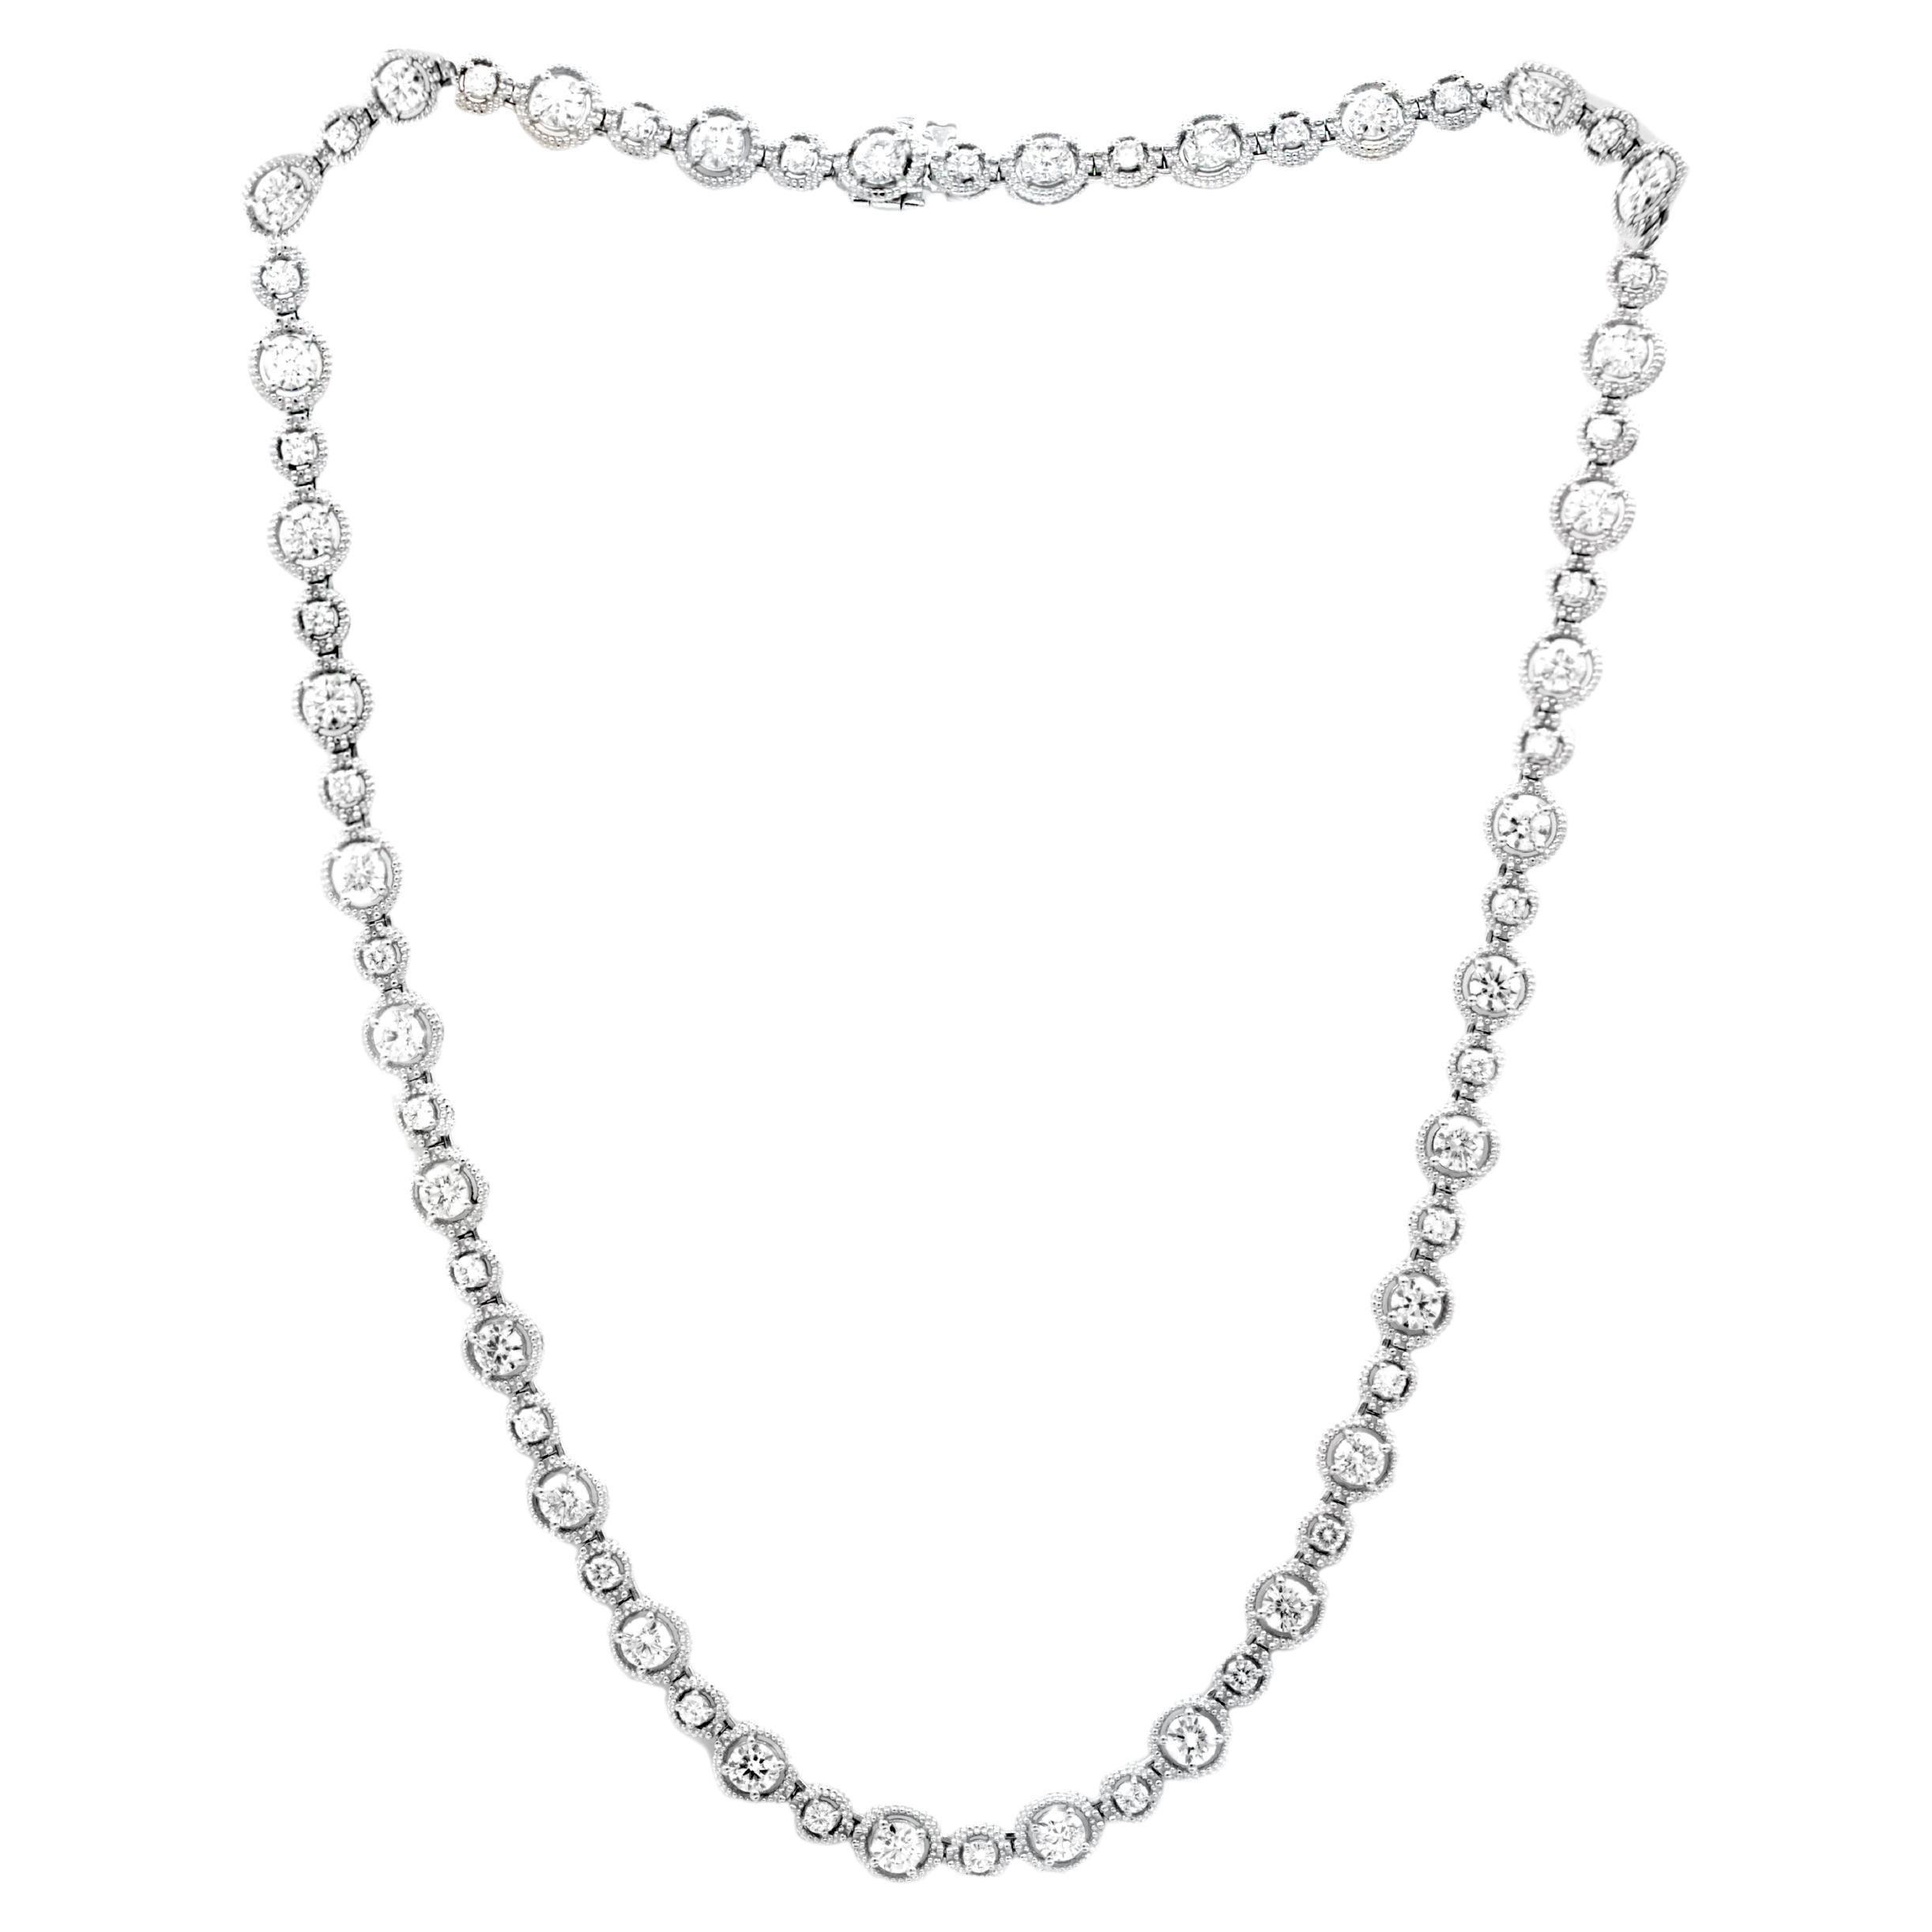 Diana M. Custom 9.60 cts Round Diamond 16" 18k White Gold Necklace For Sale